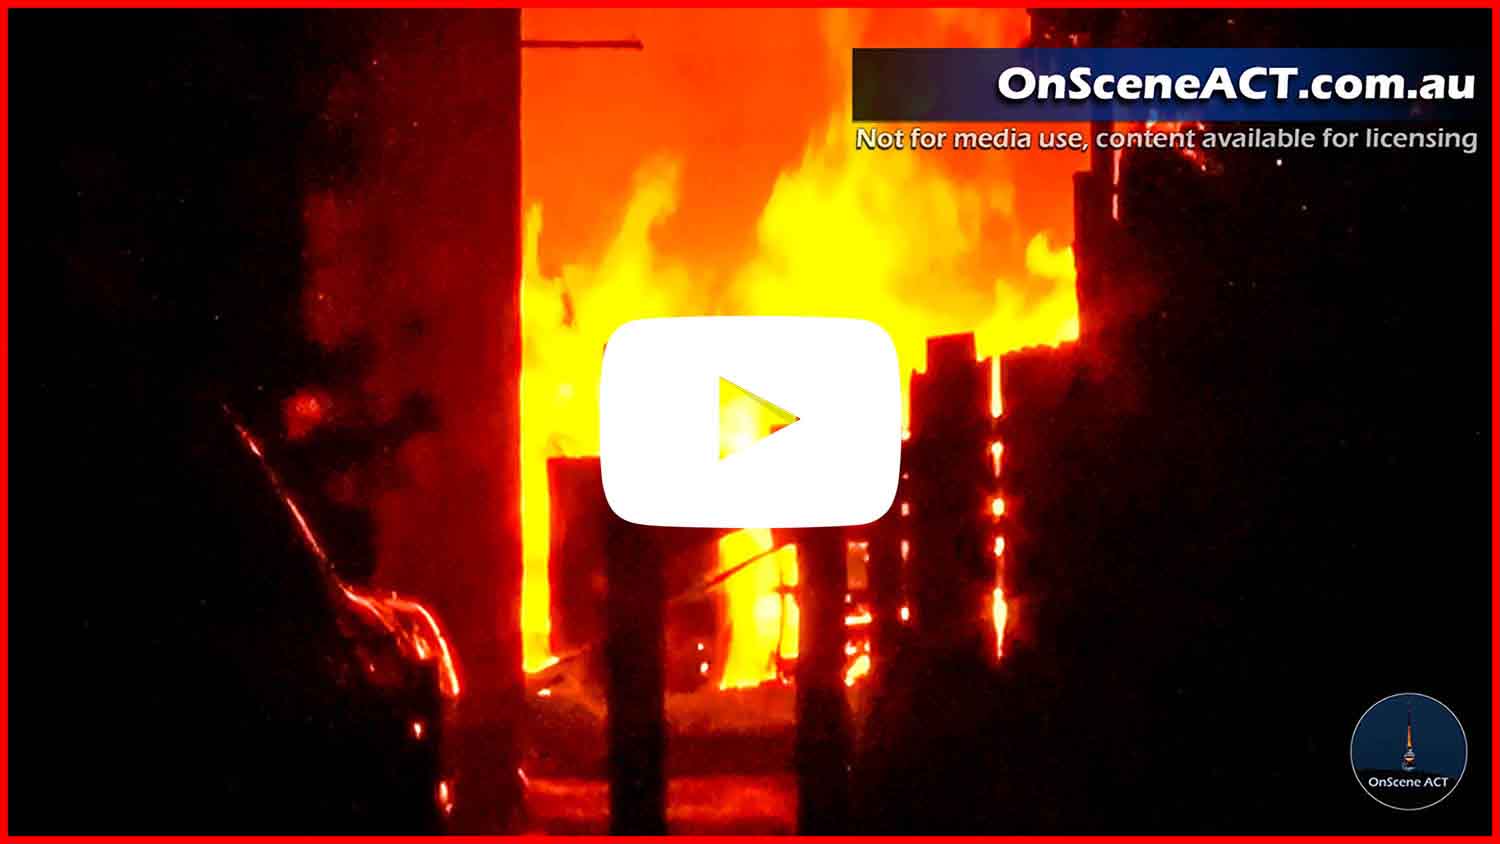 20210826 0000 downer house fire image yt